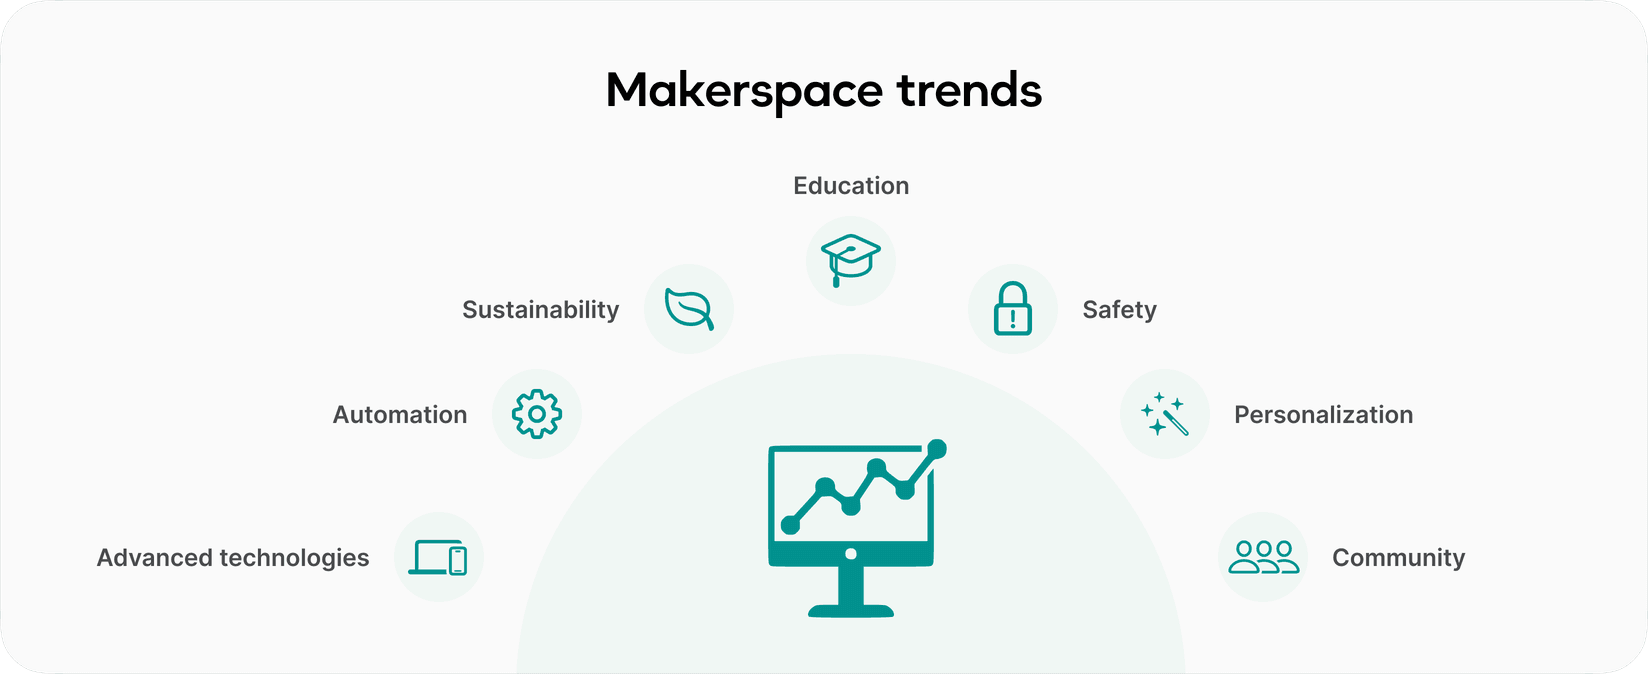 Makerspace trends infographic